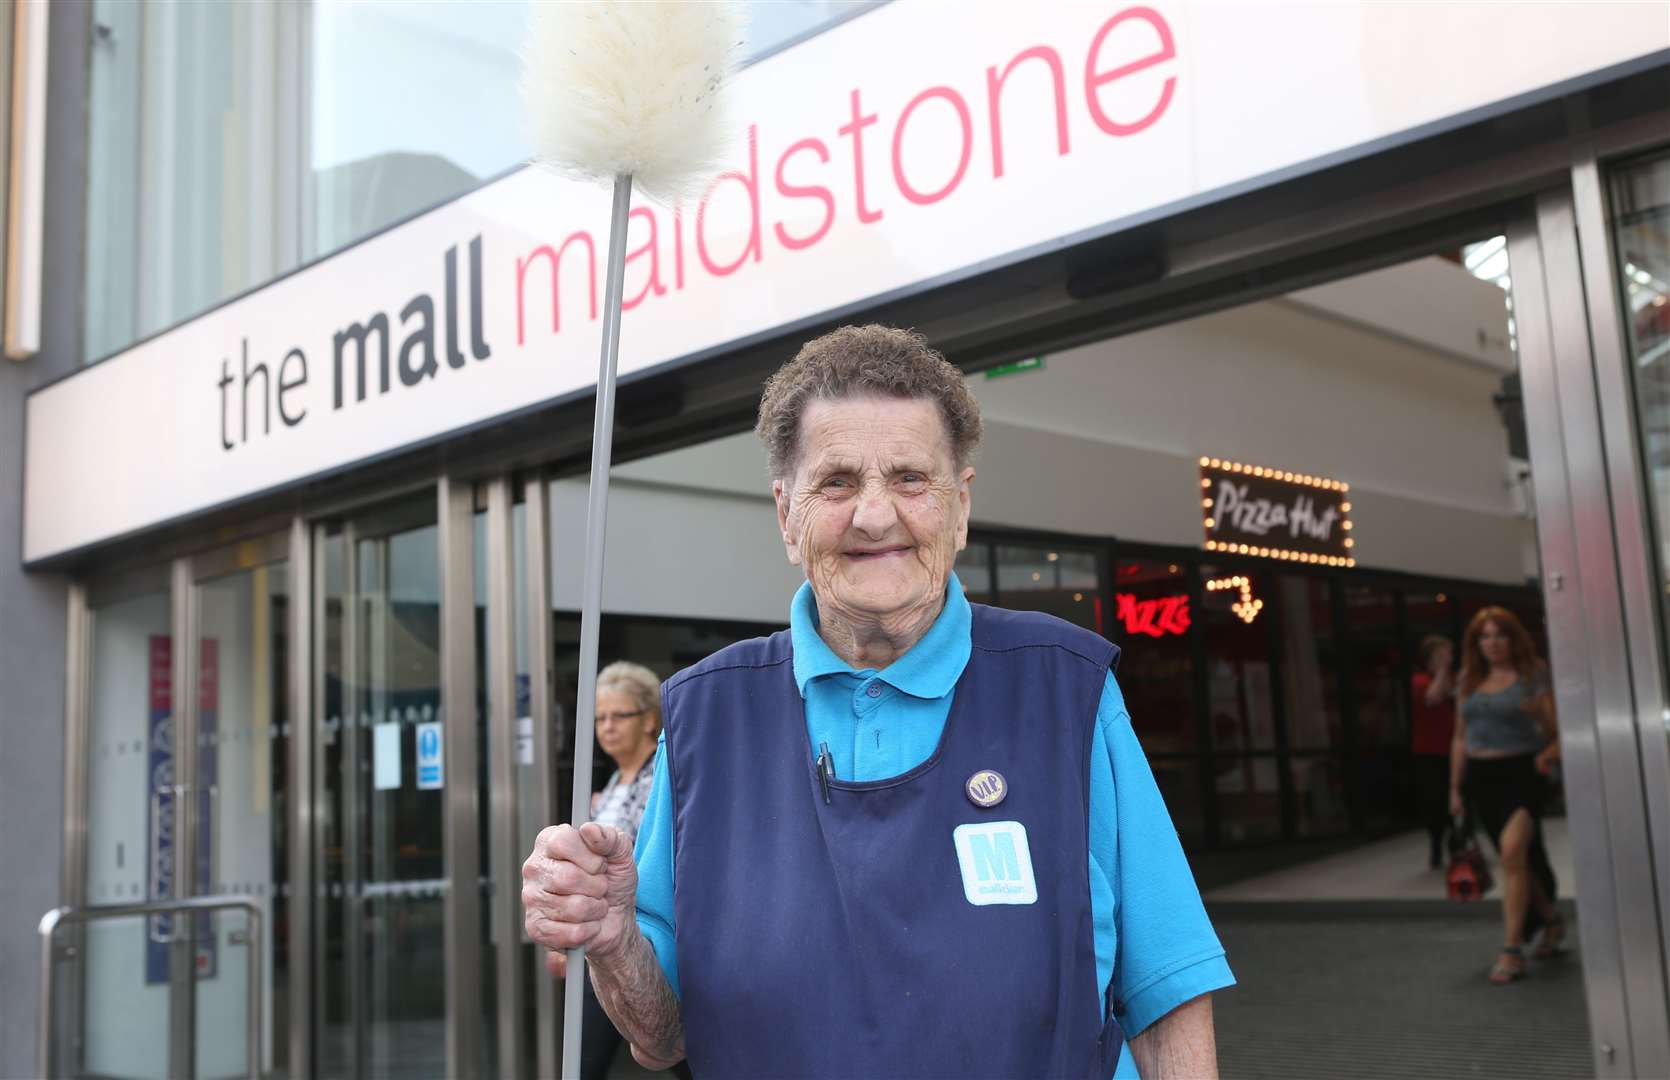 Marjorie Rose is still working at The Mall in Maidstone